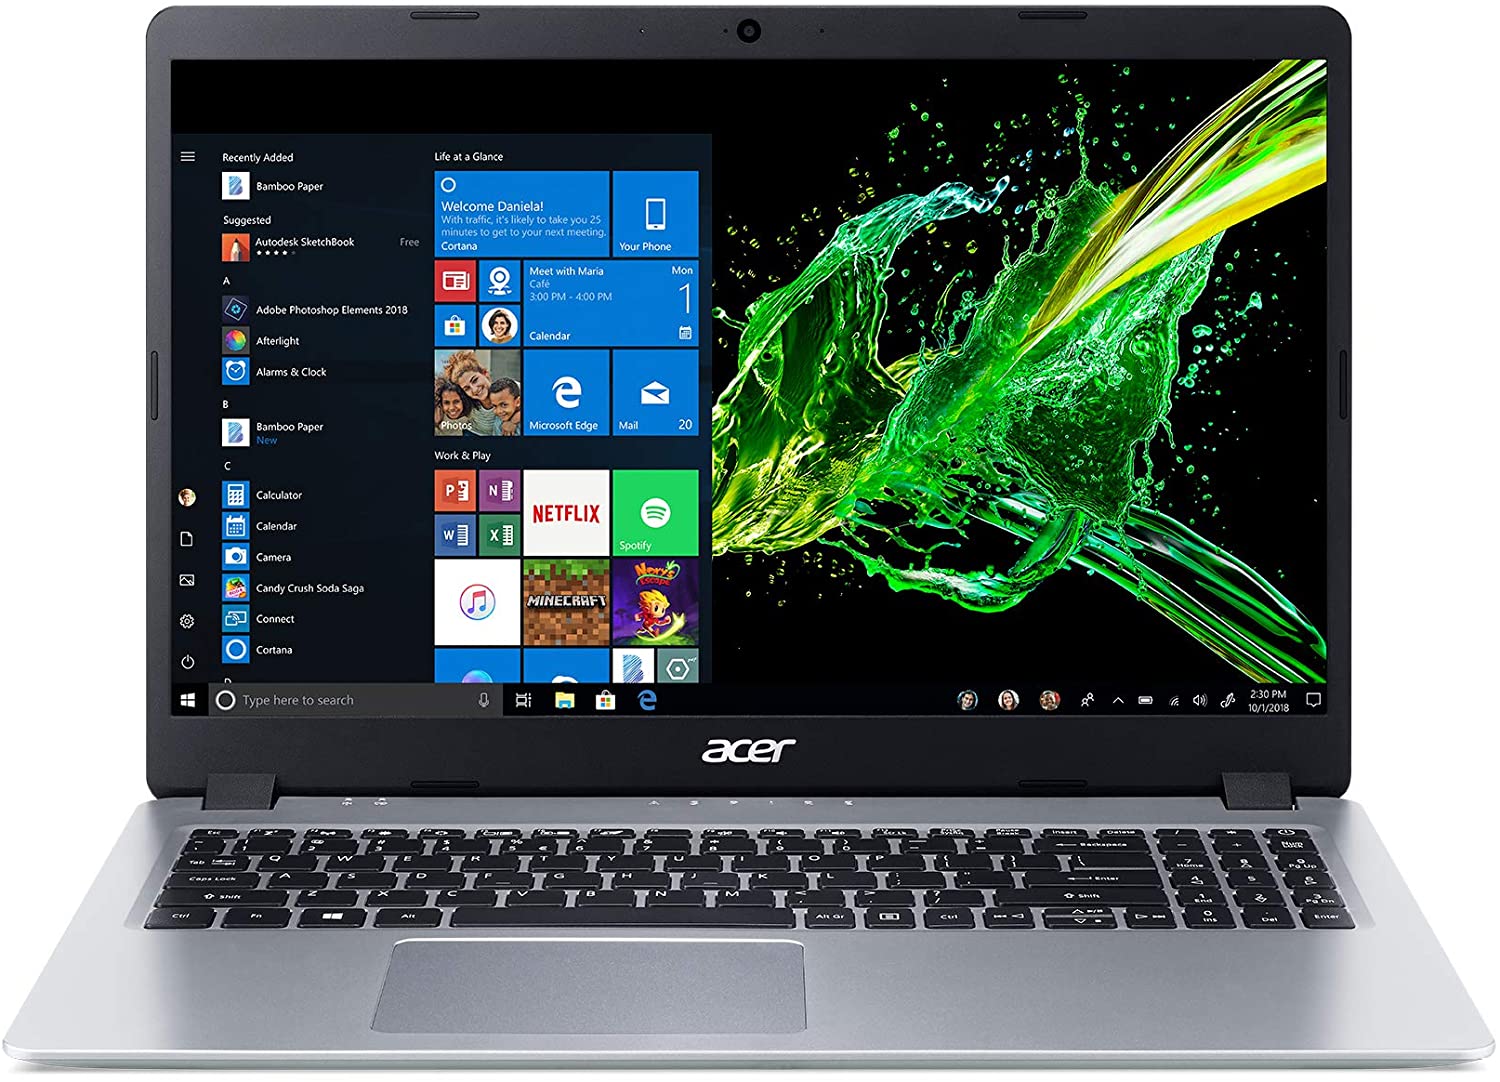 Acer A515-43-R19L 15.6 in. Aspire 5 Slim Laptop Full HD IPS Display Laptop - Silver - image 1 of 7